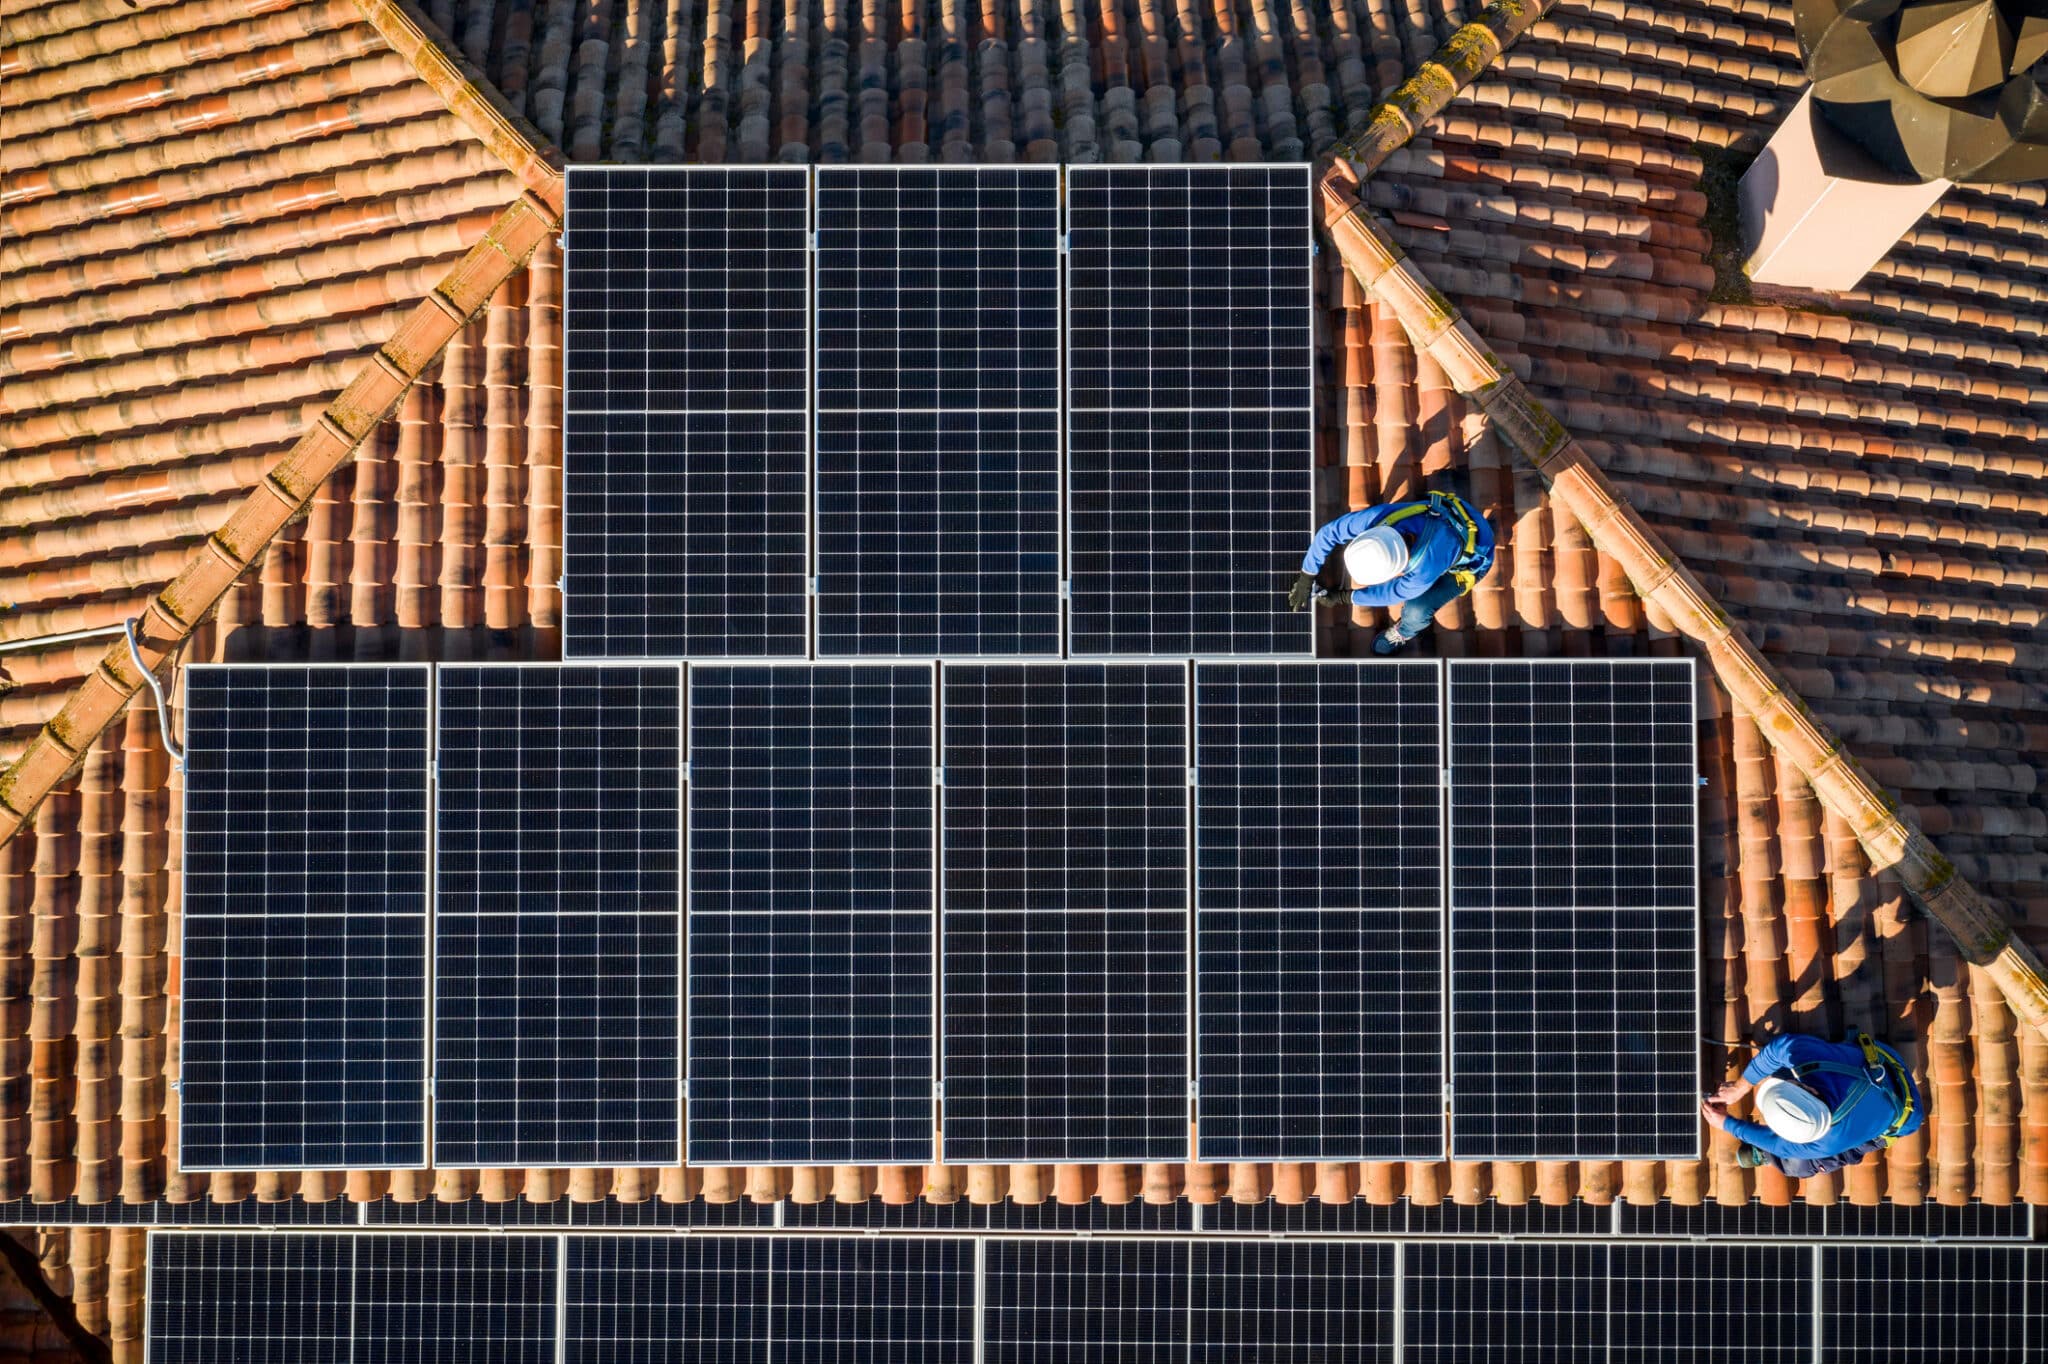 aerial view of Two workers installing solar panels on a house roof